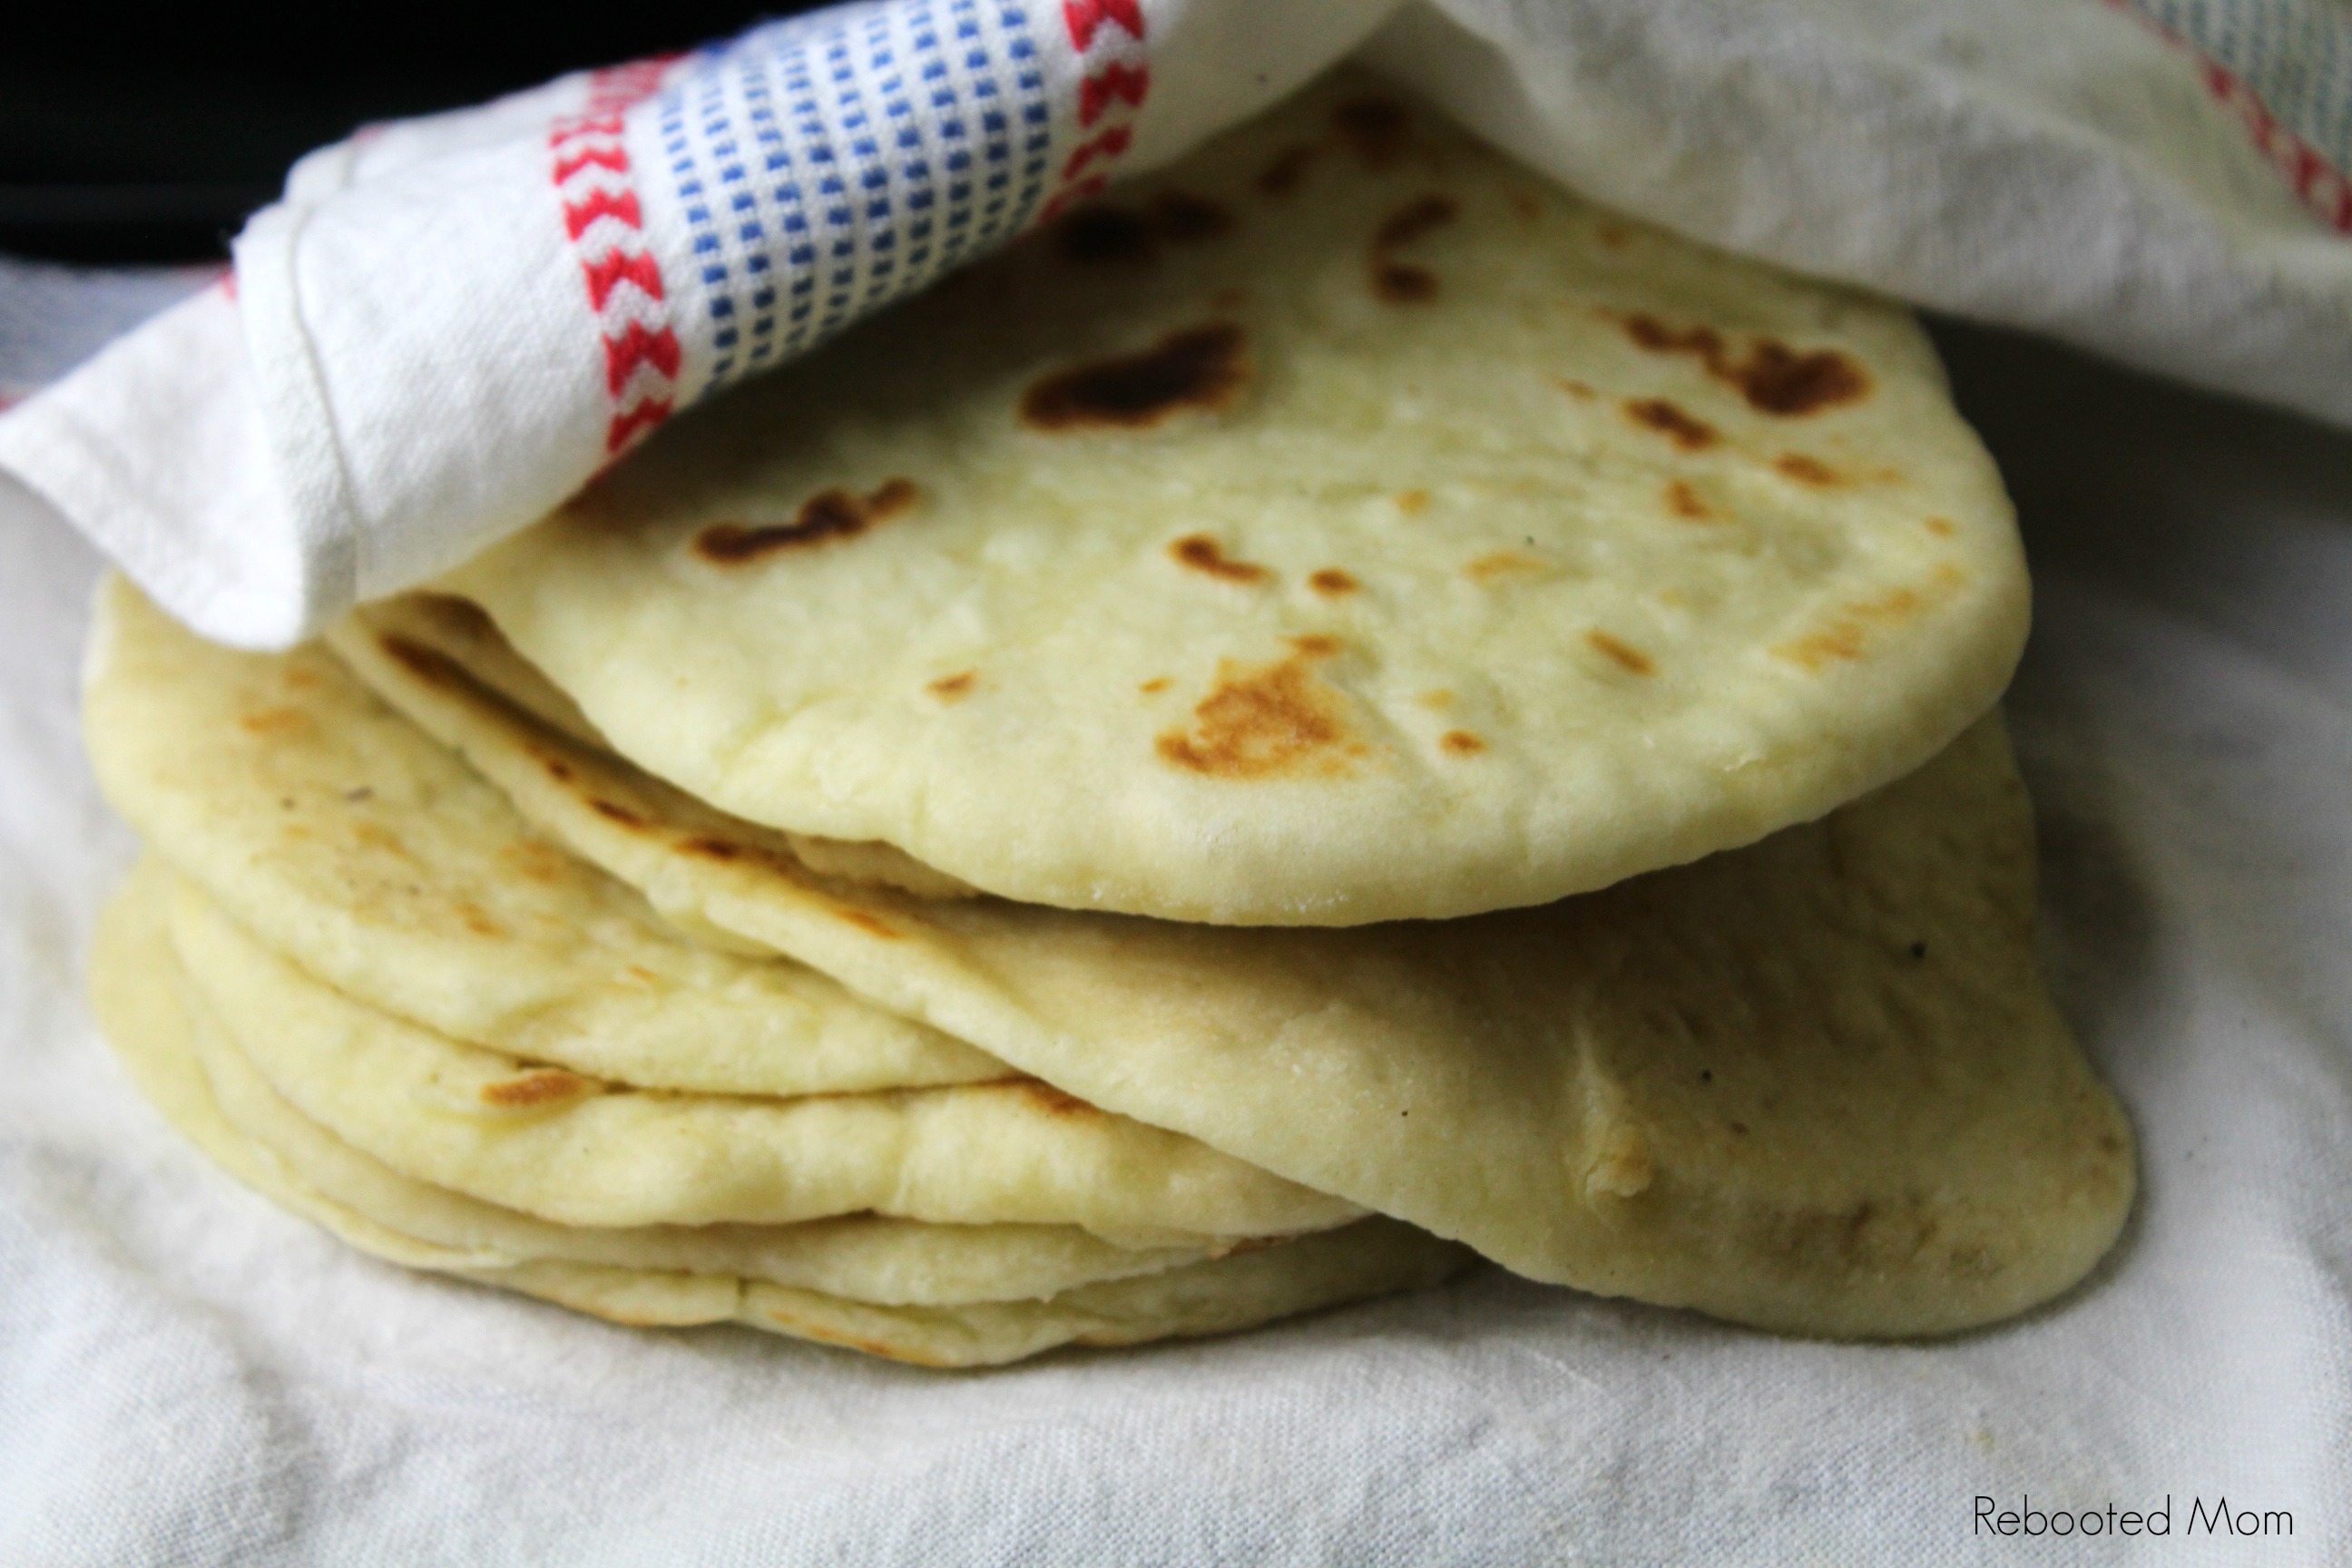 Foolproof Sourdough Naan that comes together easily with a few simple ingredients and an active sourdough starter for naan that's soft and full of flavor!  #sourdough #naan #homemade 